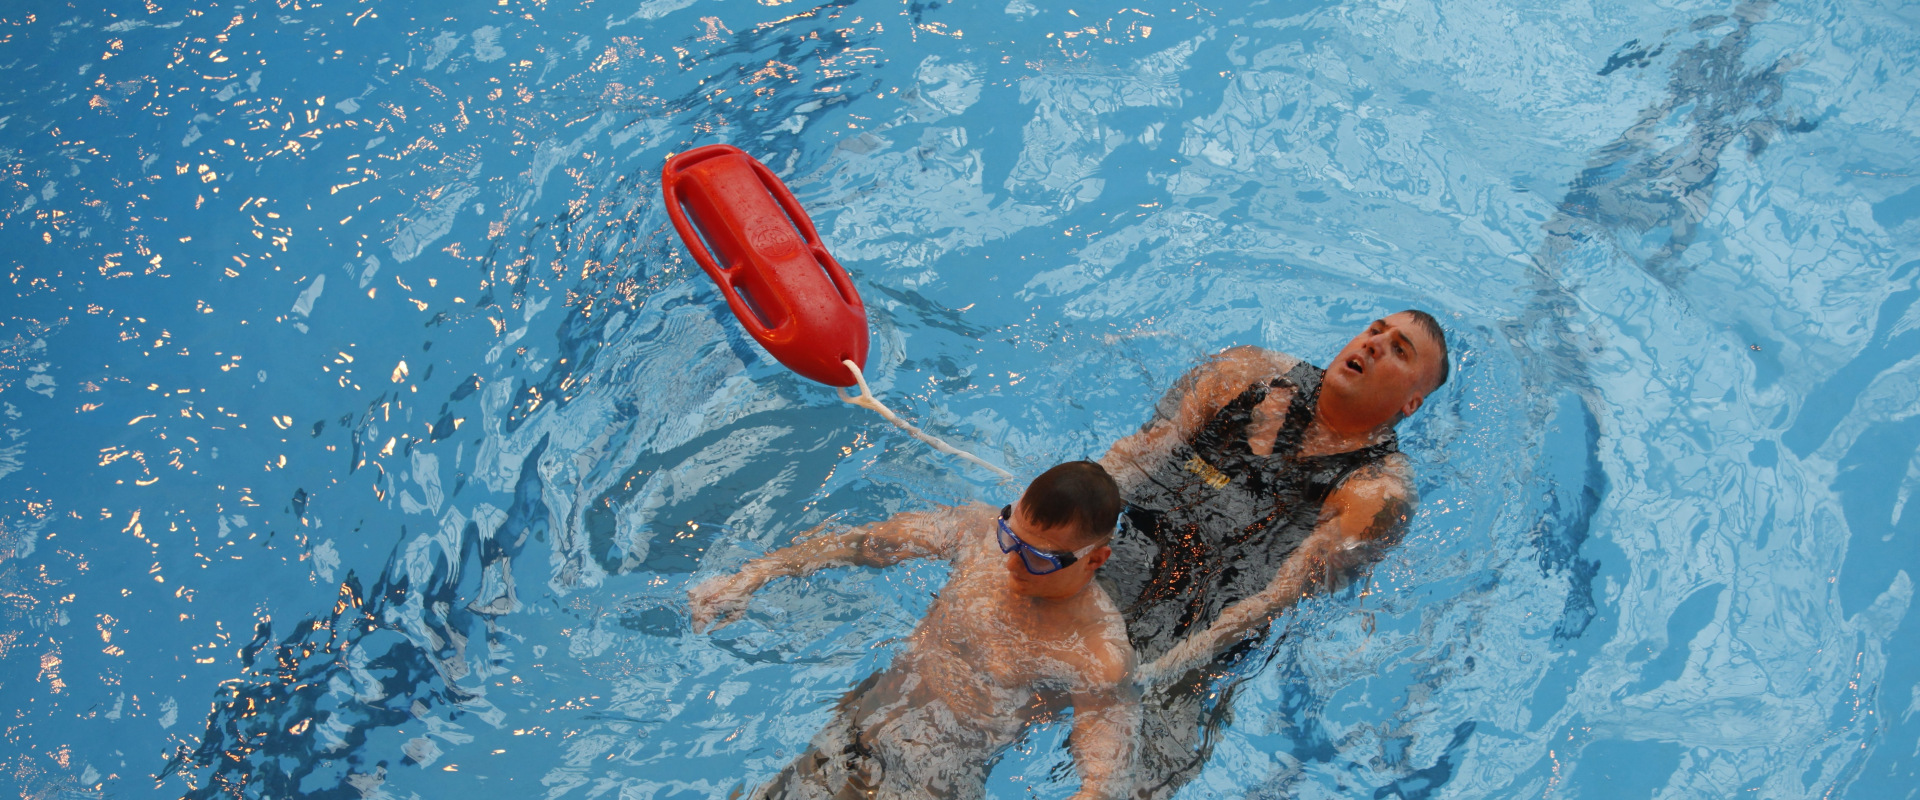 CPR for Swimming Accidents: How to Prepare for an Emergency